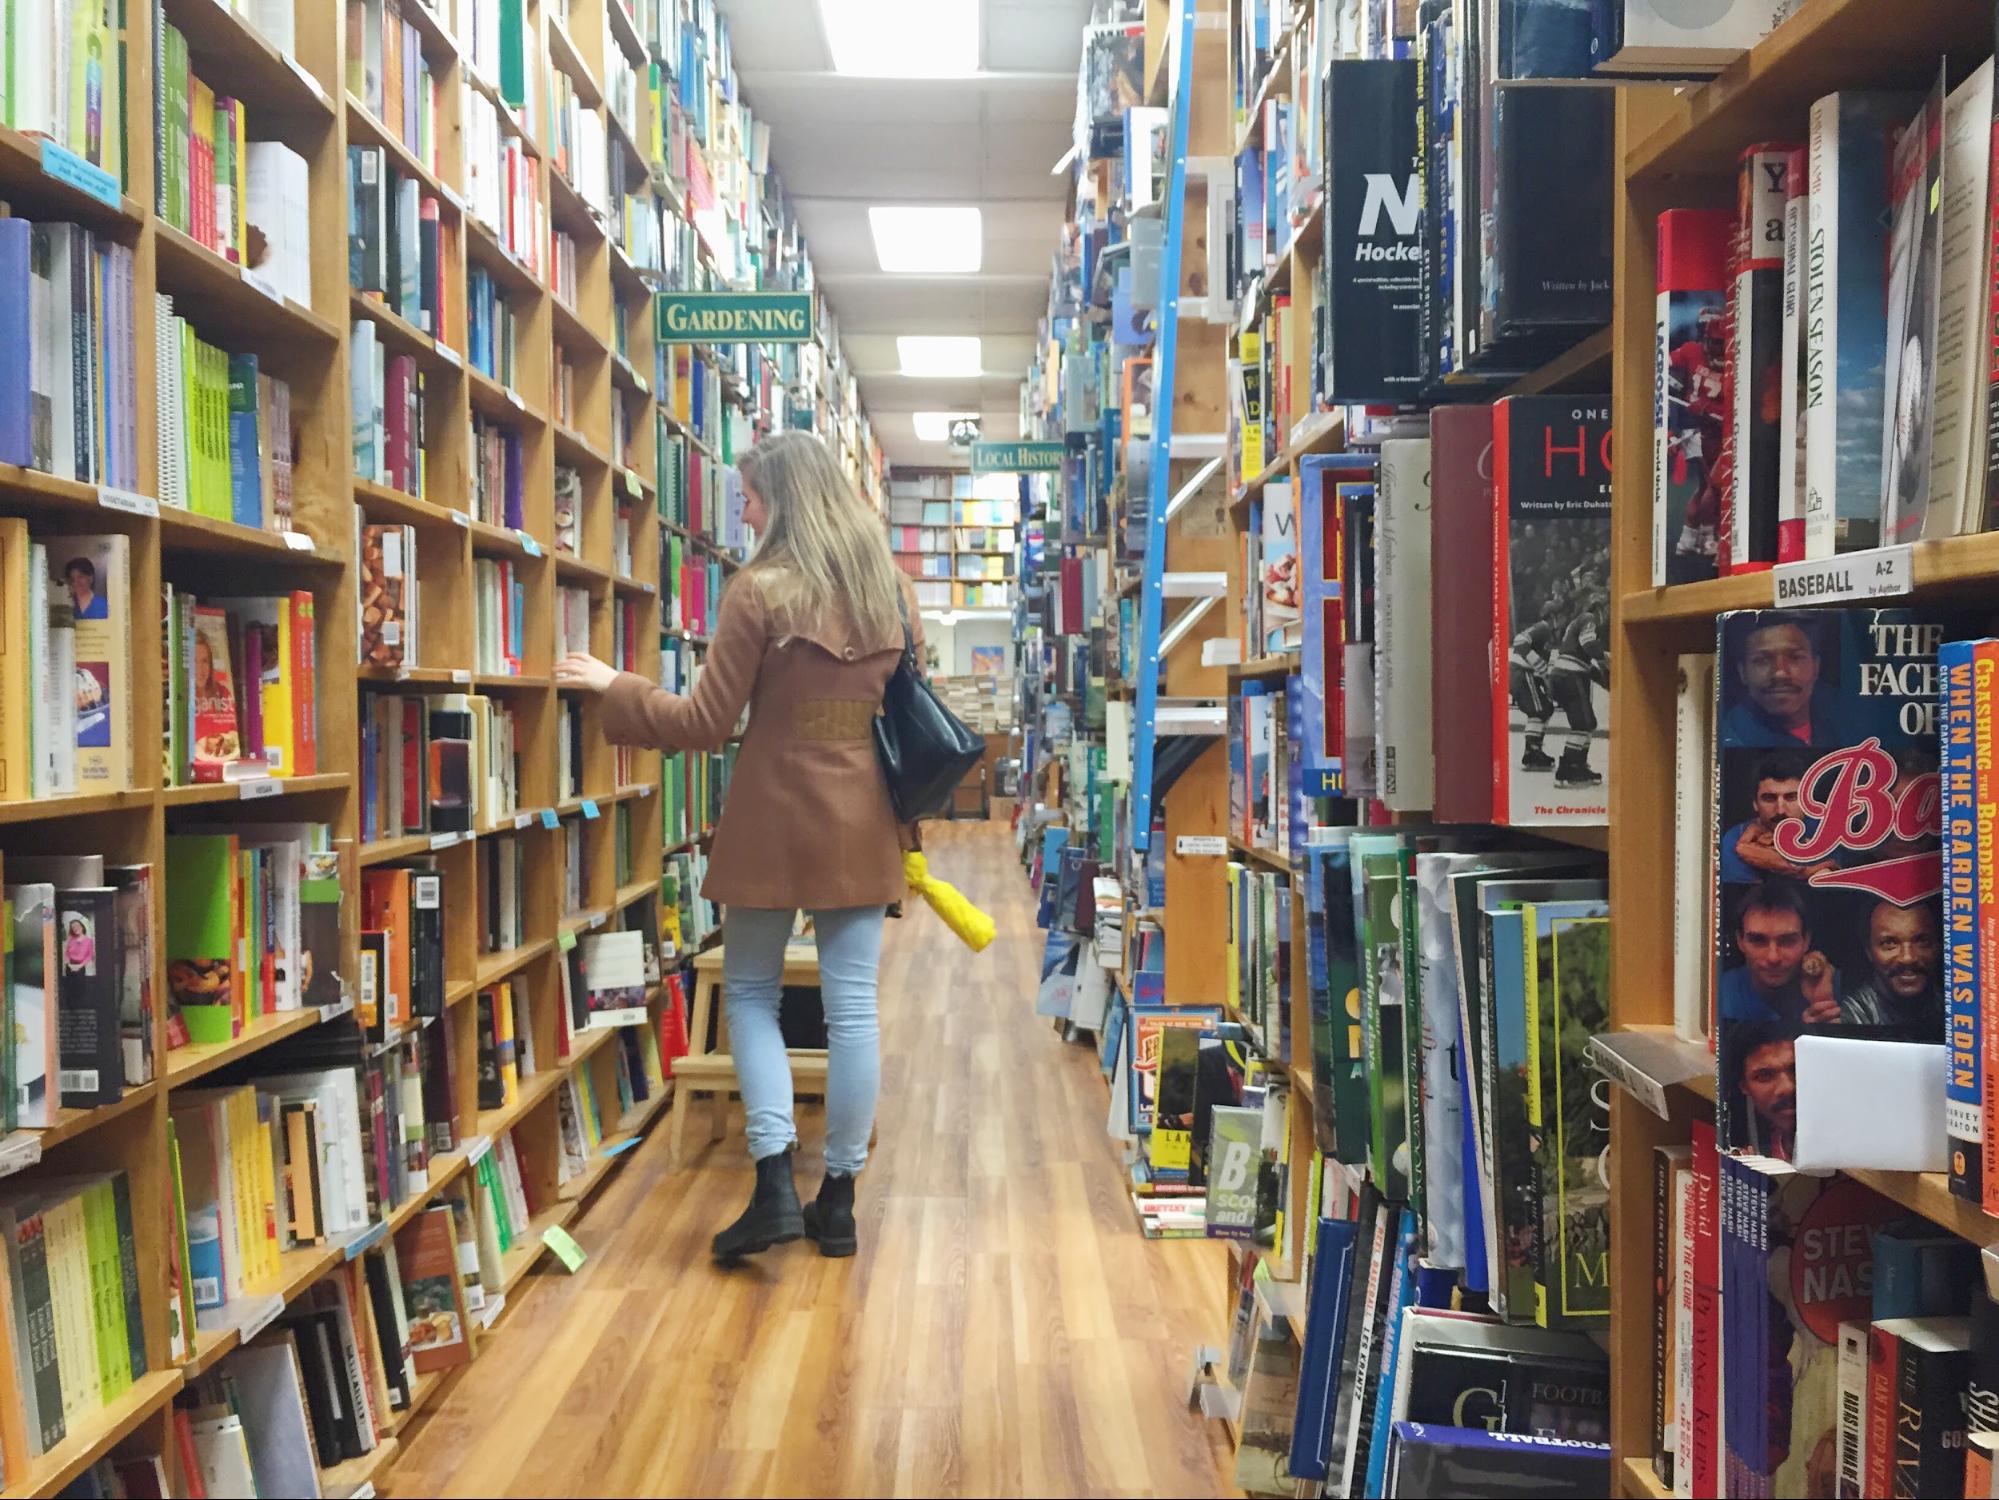 A woman explores the aisles of a used bookstore.